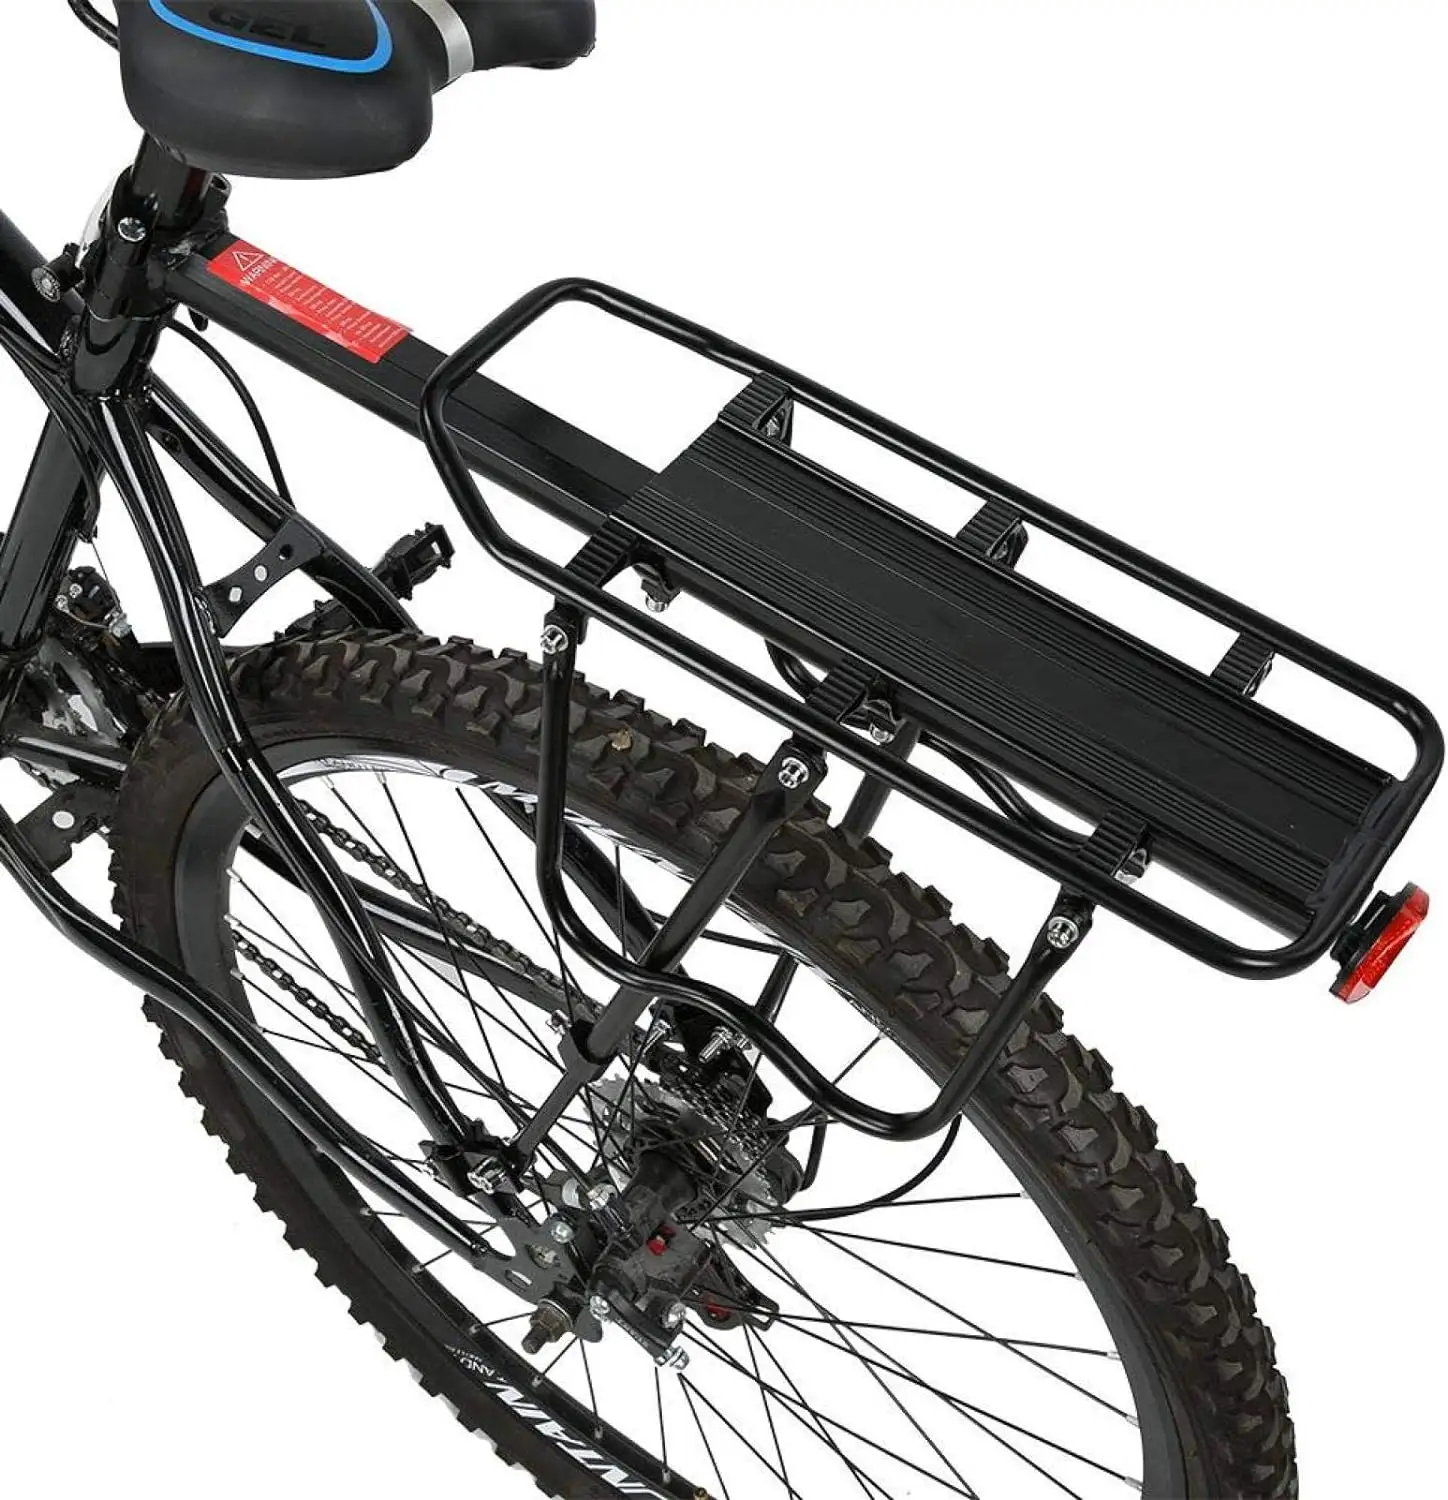 Durable and Easy to Use Universal Quick Release Bike Rack for Mountain and Road Bicycles